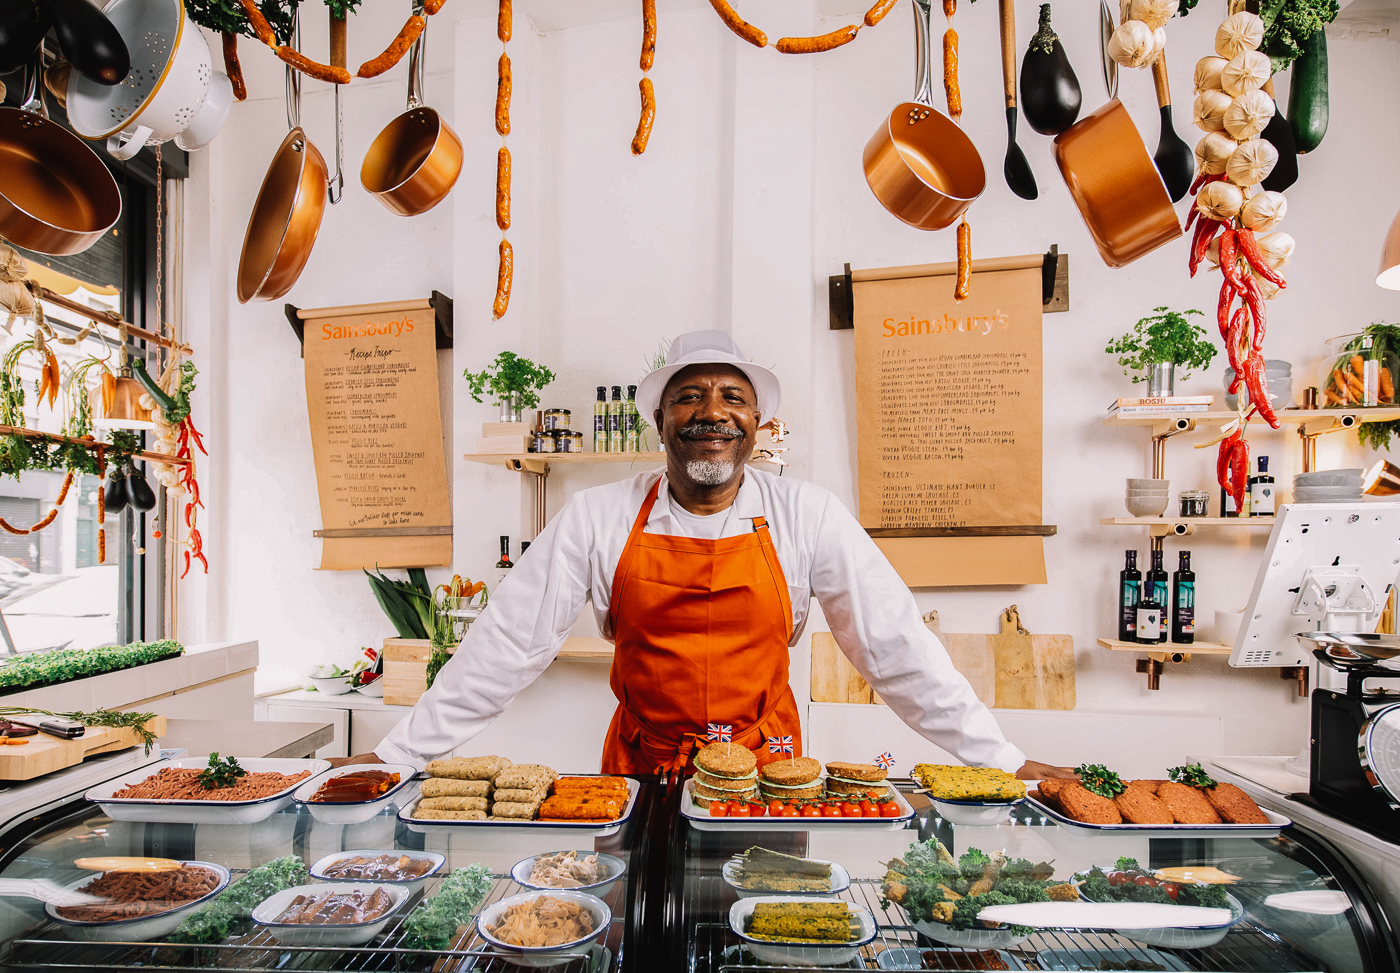 Sainsbury's, pop up, how to build a pop up, London pop up, things to see in London, short-term retail, meat-free, plant-based